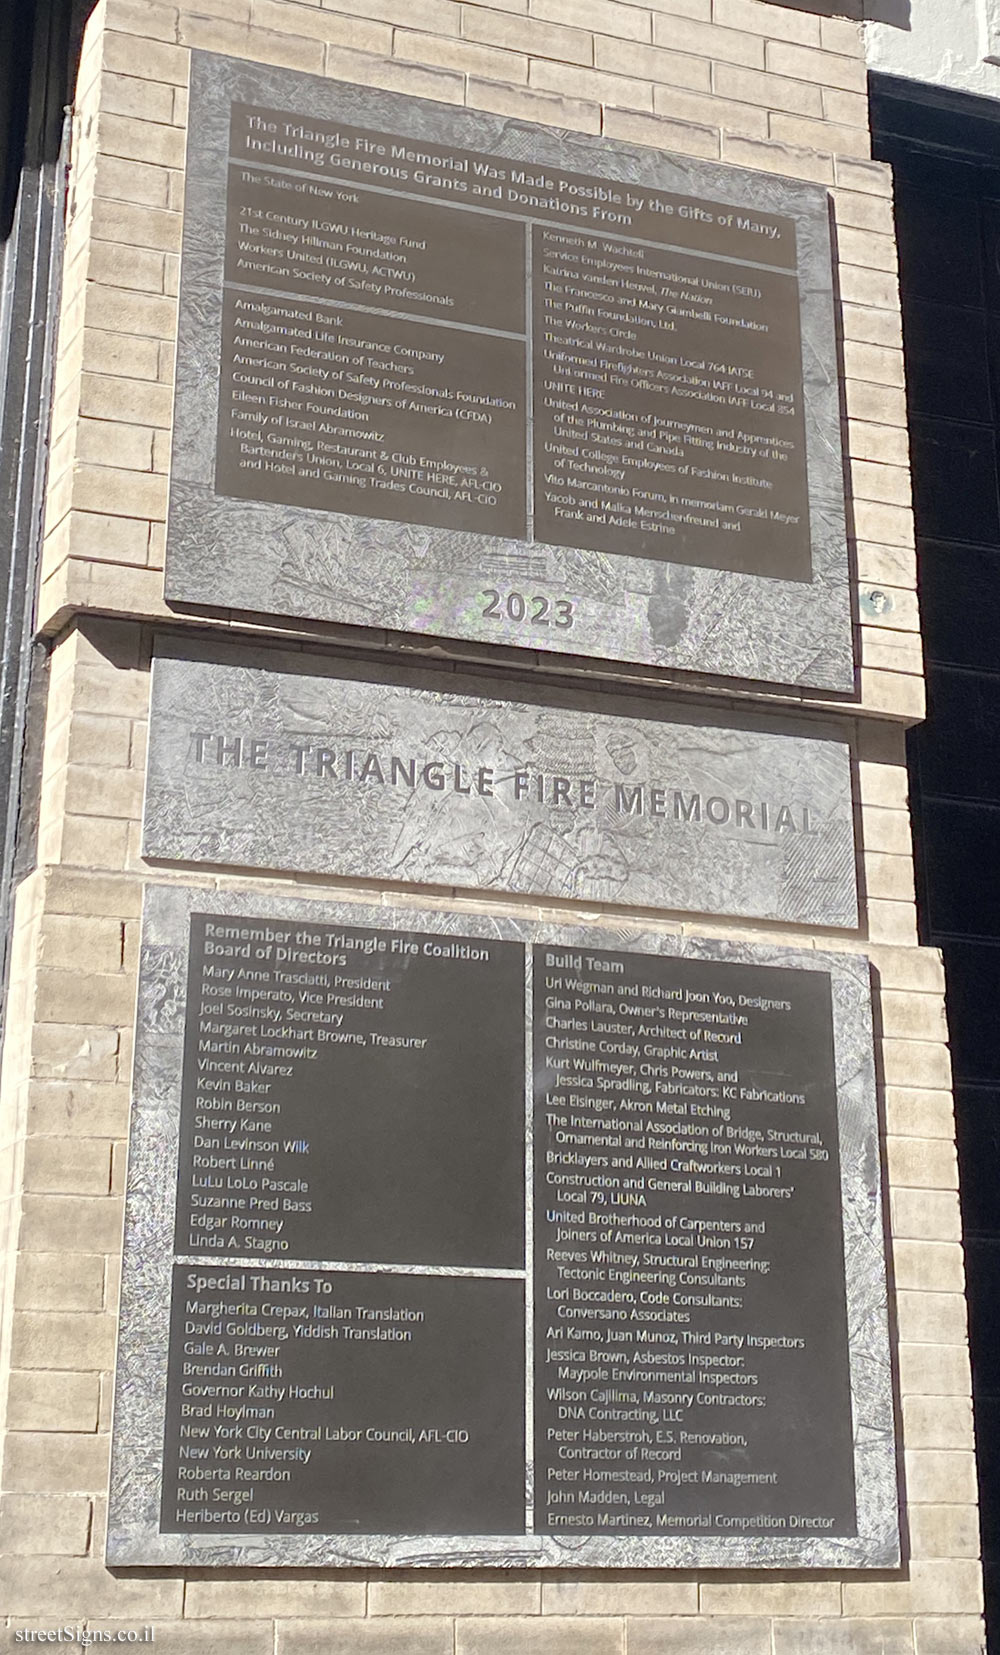 New York - commemoration of the fire at the Triangle shirt factory